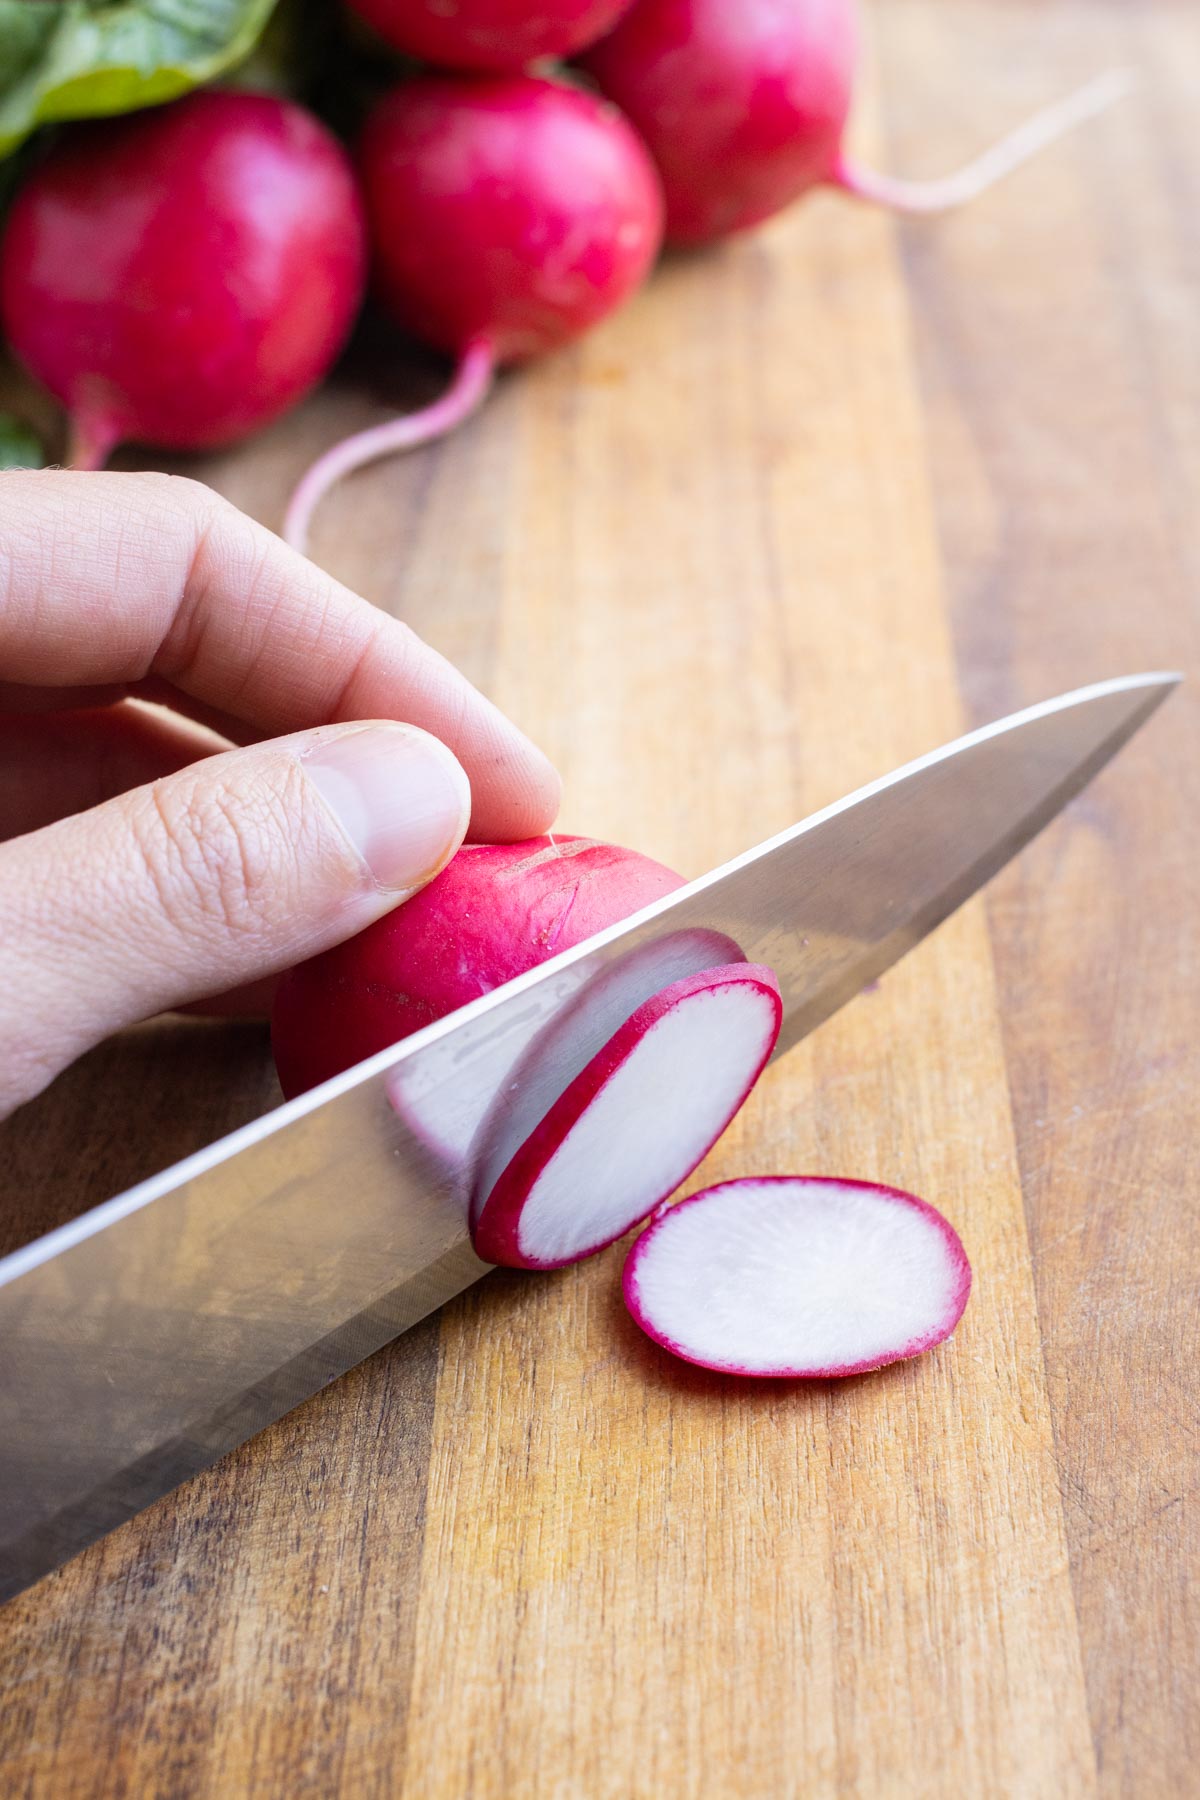 A knife slices radishes on a cutting board.